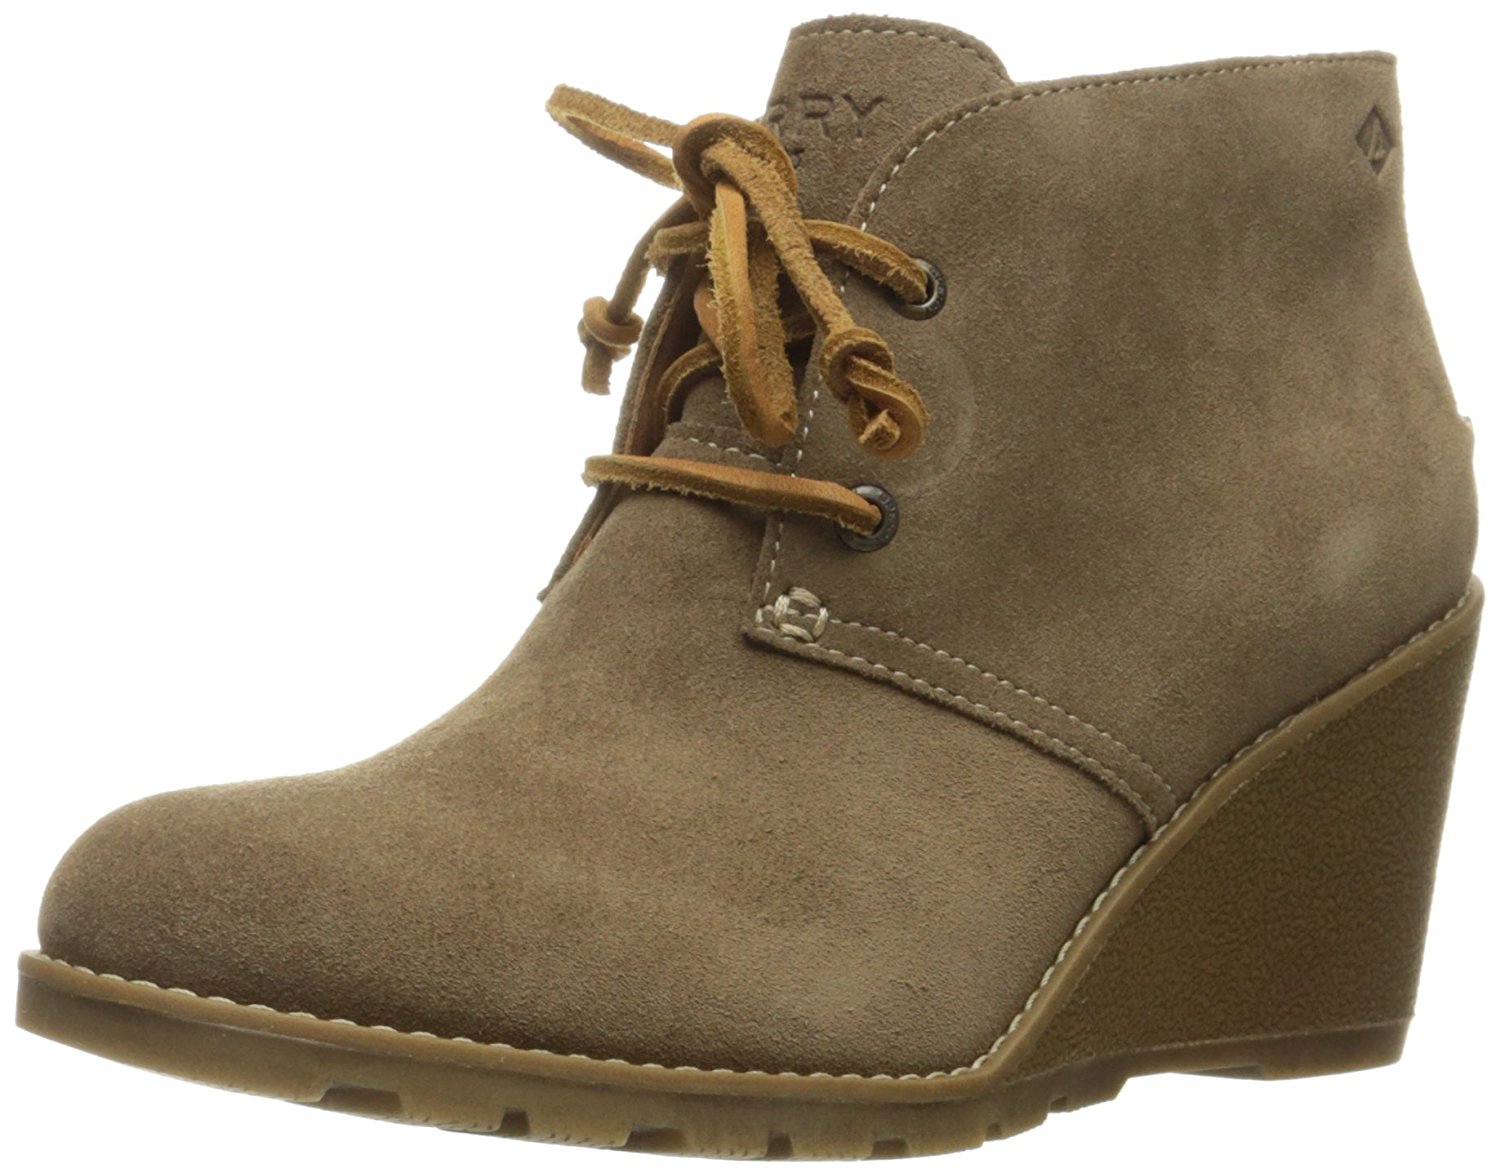 Sperry Womens Stella Leather Round Toe Ankle Fashion Boots, Taupe, Size ...